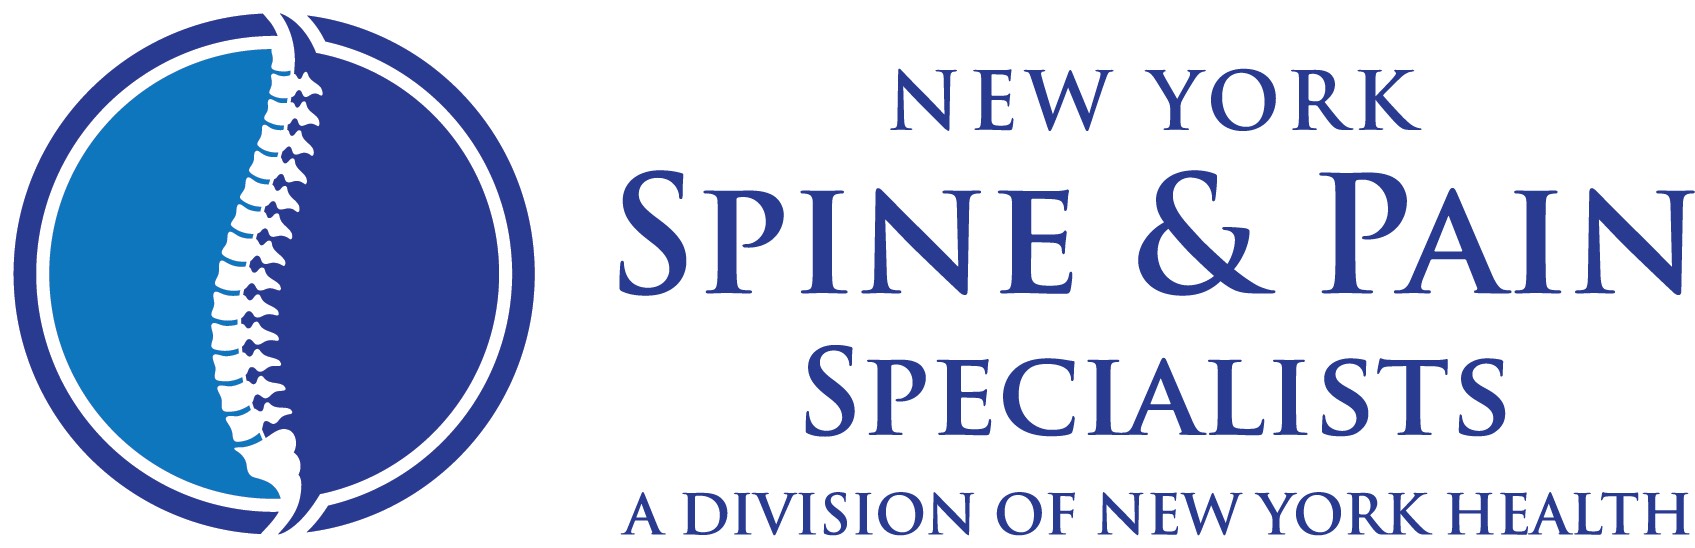 New York Spine & Pain Specialists